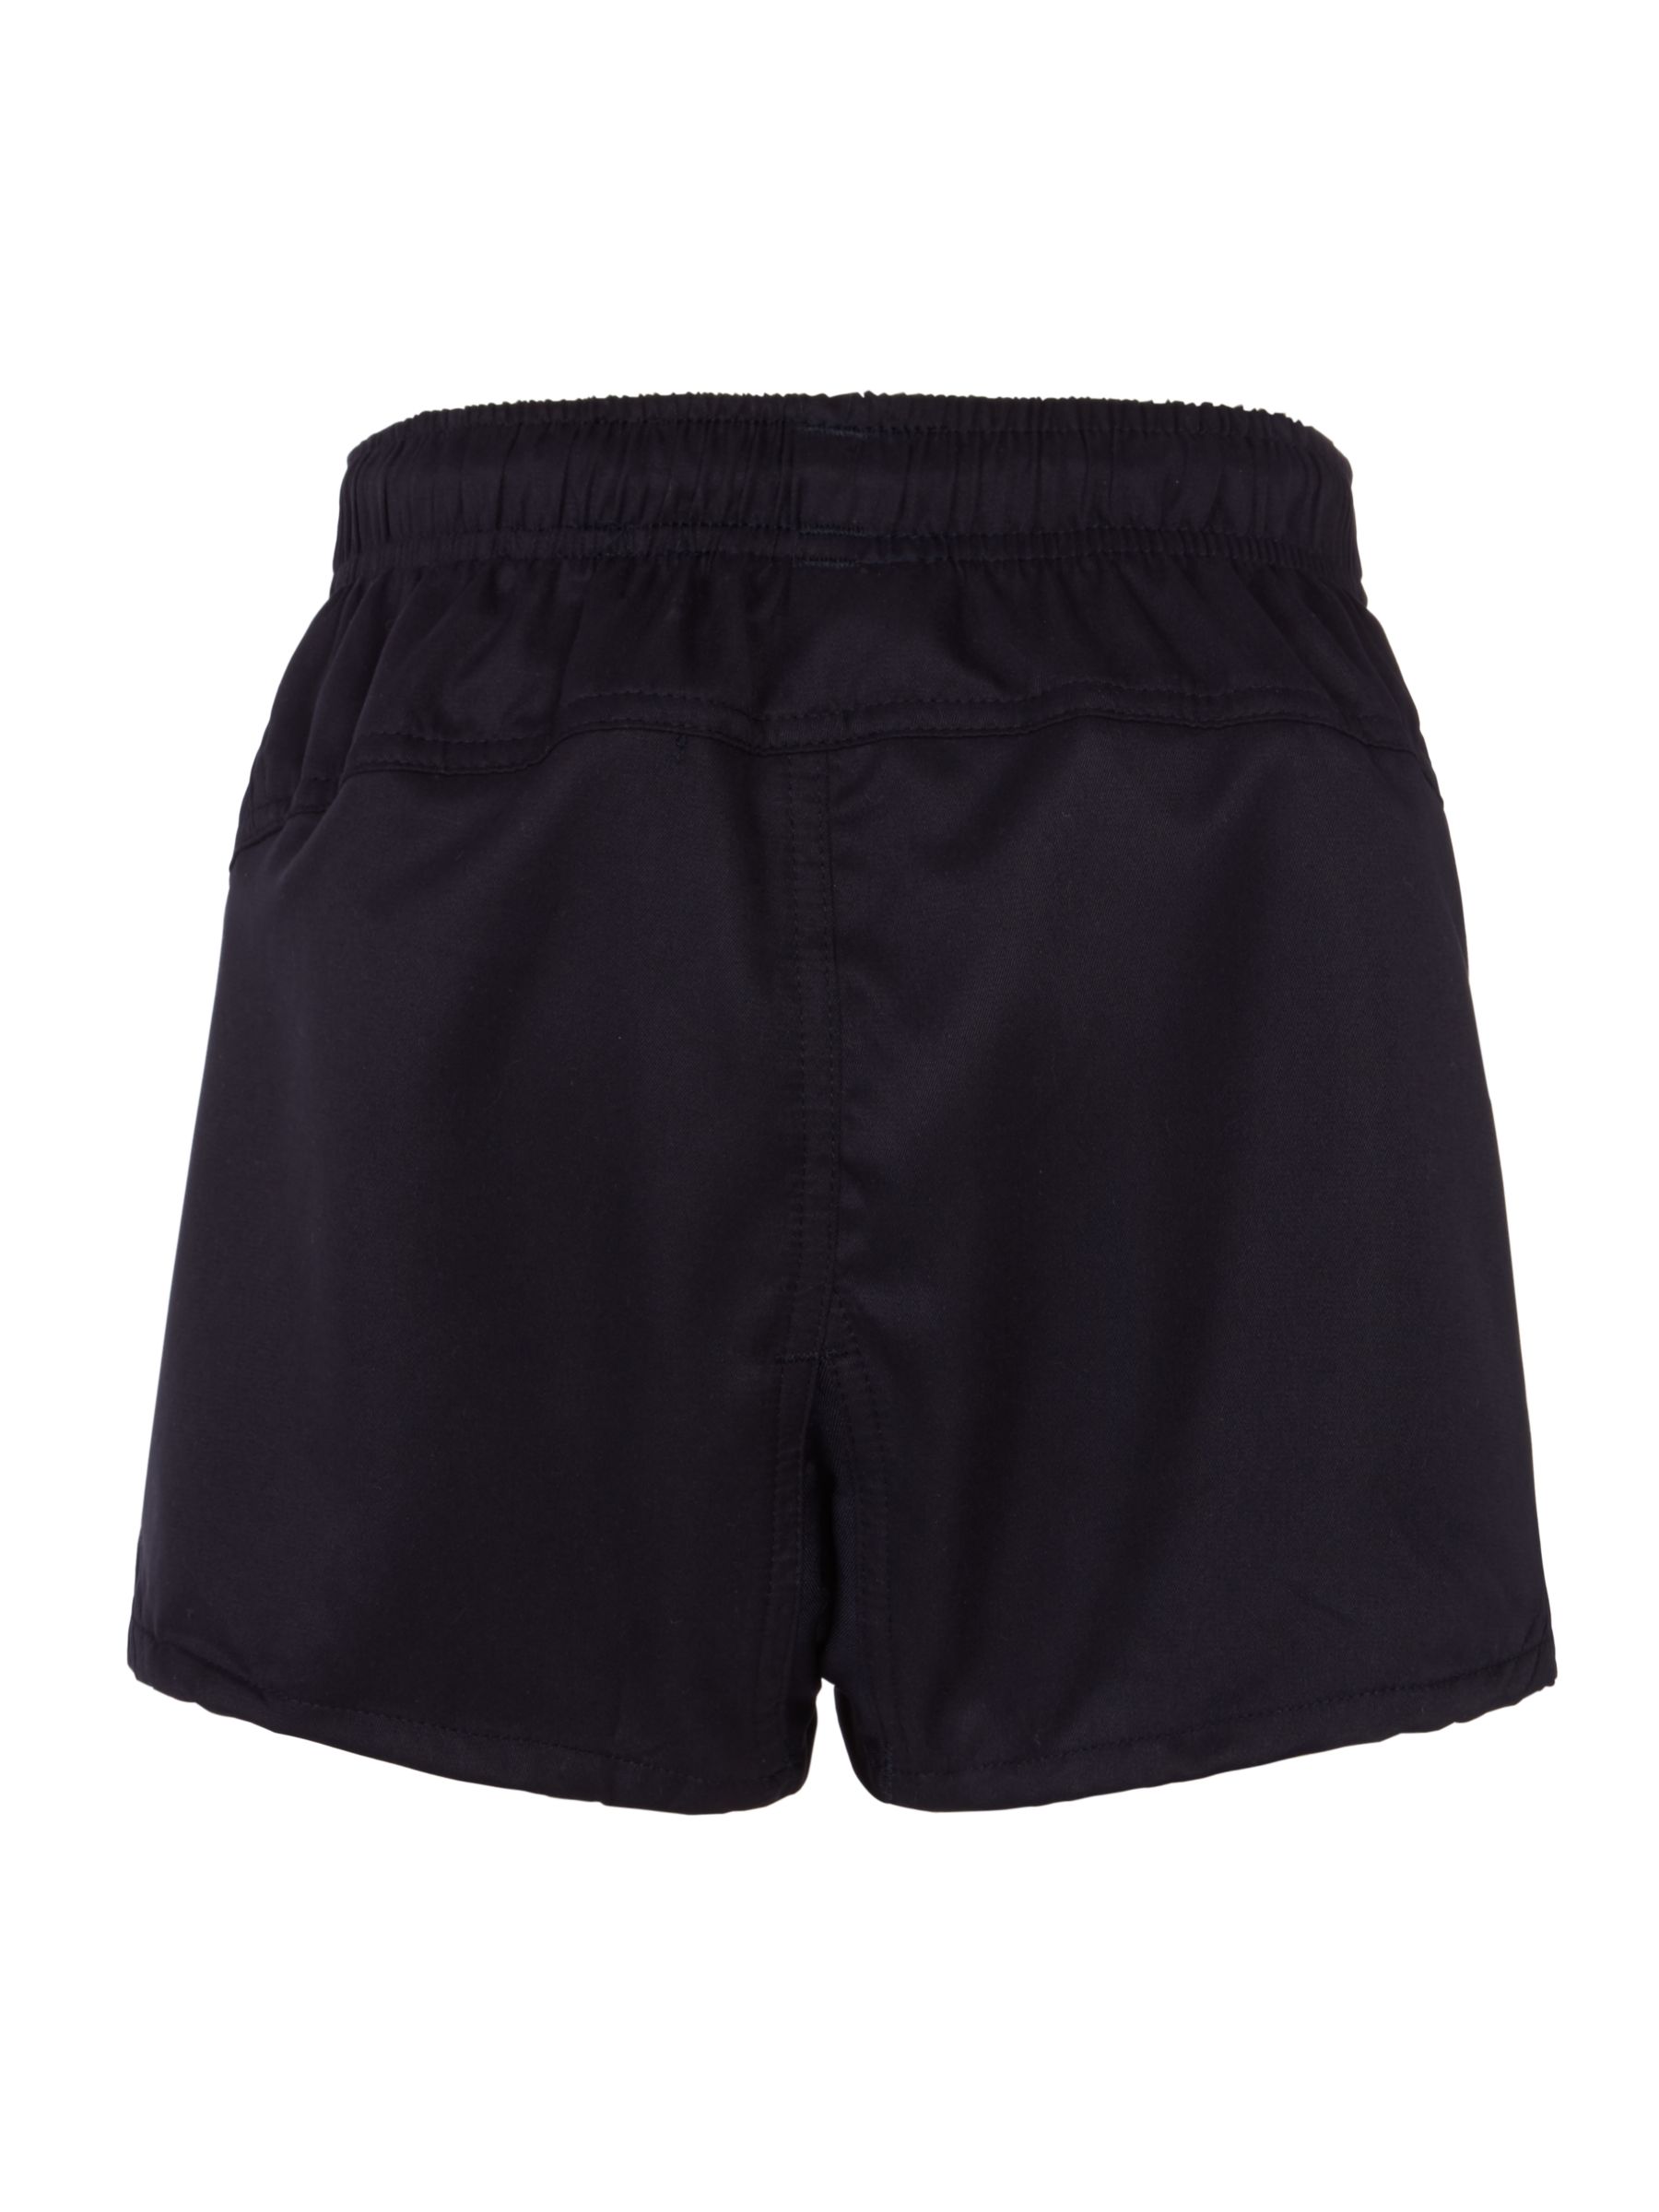 Colfe's School Boys' Rugby Shorts, Navy at John Lewis & Partners